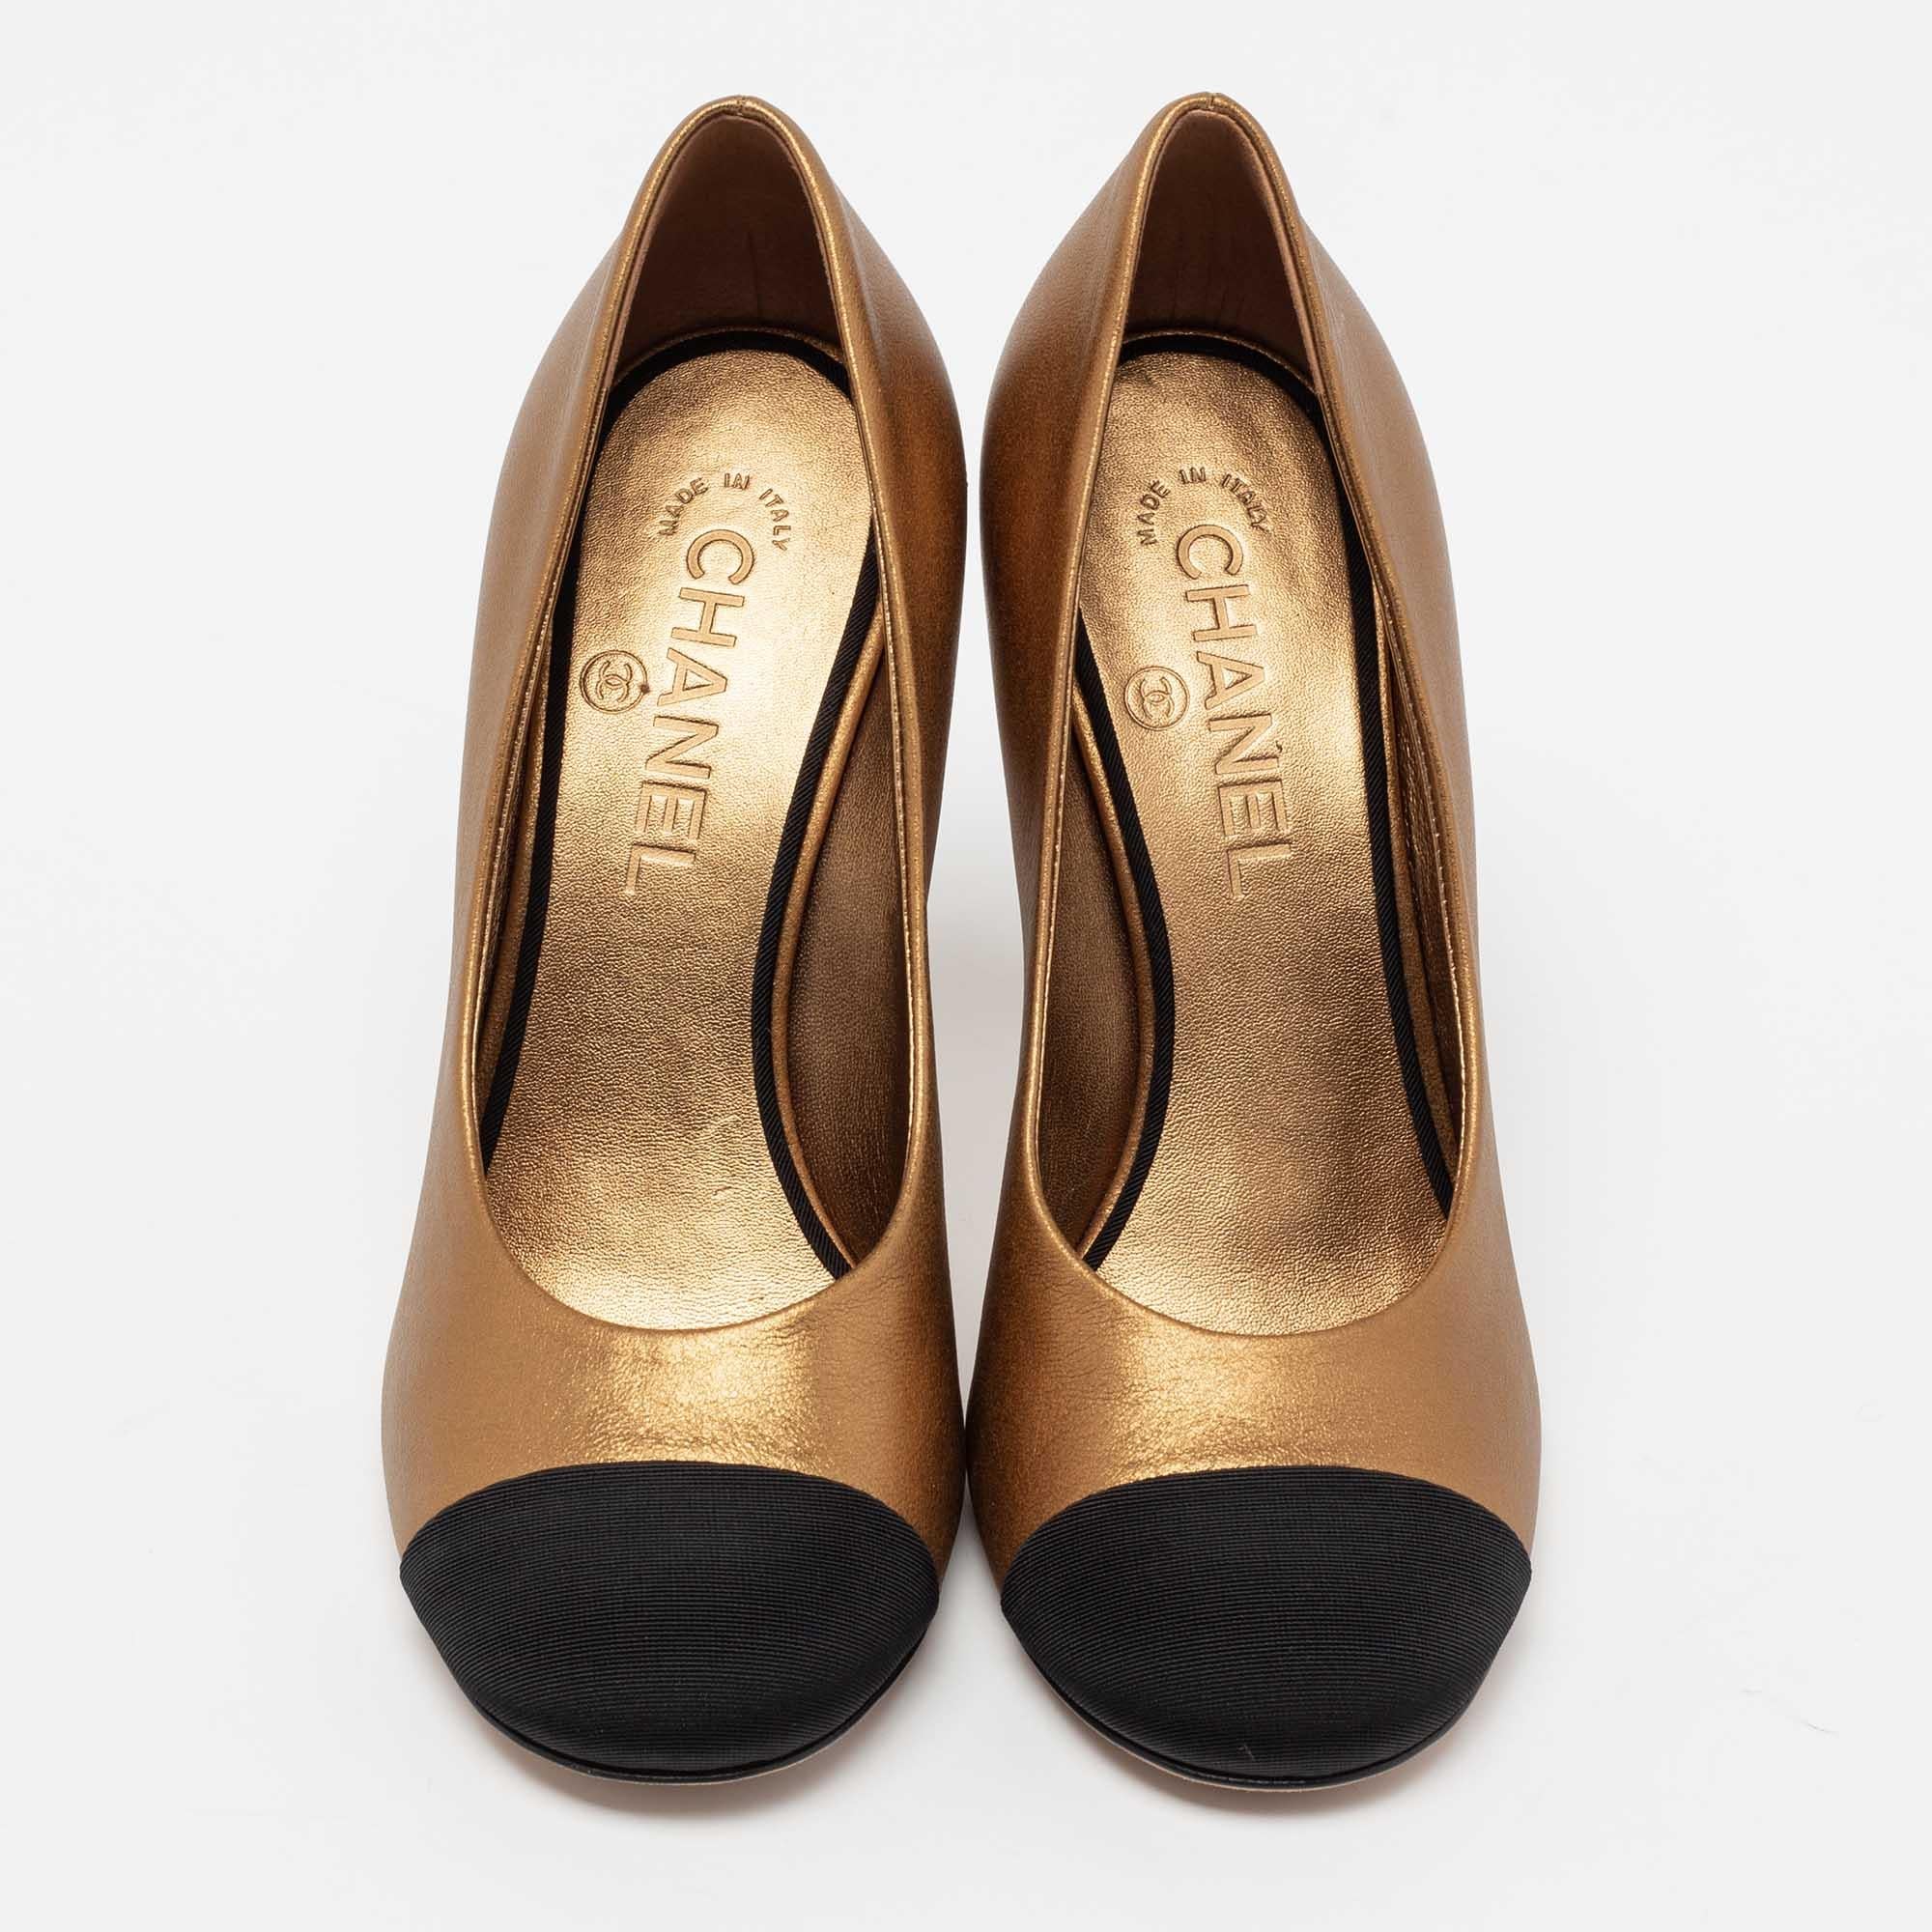 The black cap toes against the metallic gold exterior of this pair of Chanel pumps make for an elegant contrast. Sculpted from leather and fabric, it's 10.5cm heels is detailed with a 'CC' motif, and these shoes are adorned with gold-tone